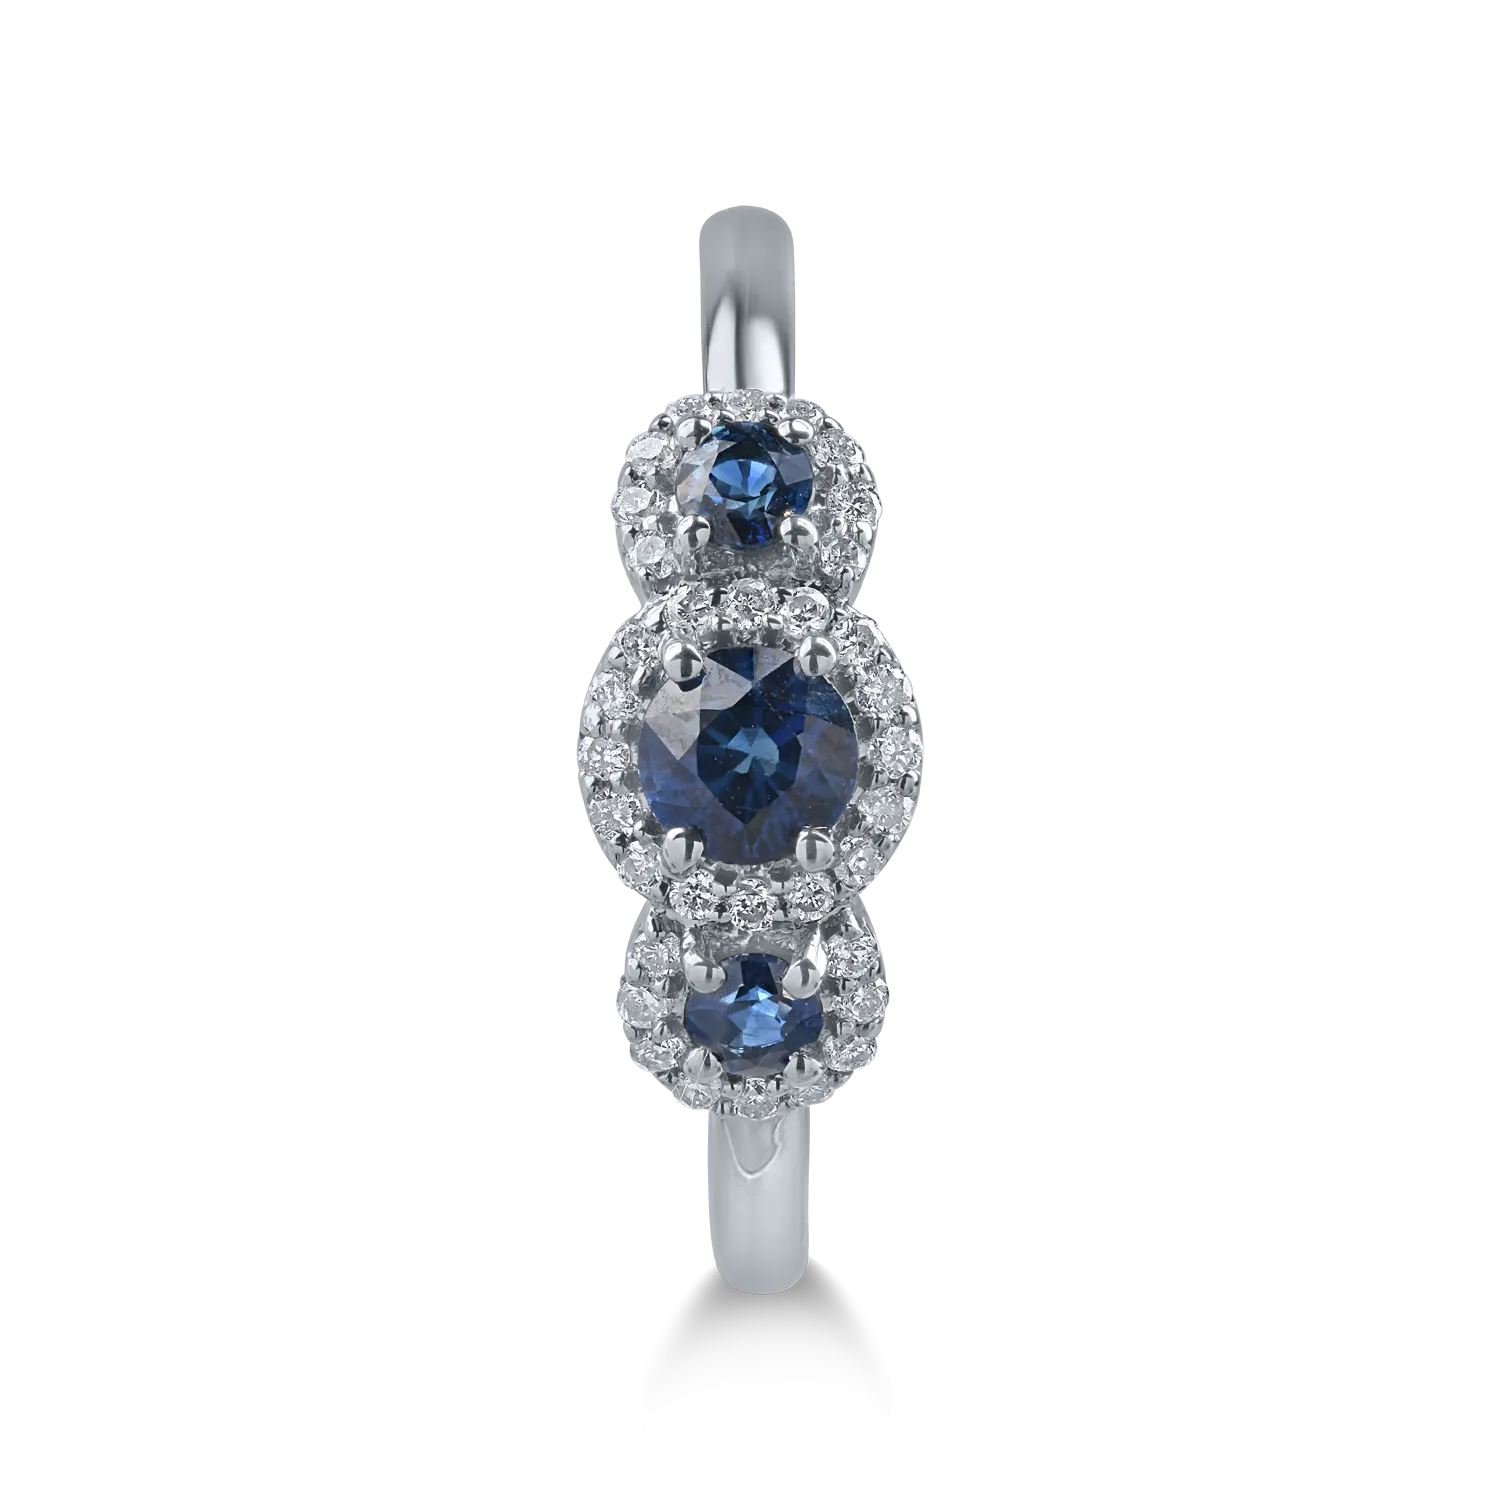 White gold ring with 0.53ct heated sapphires and 0.14ct diamonds